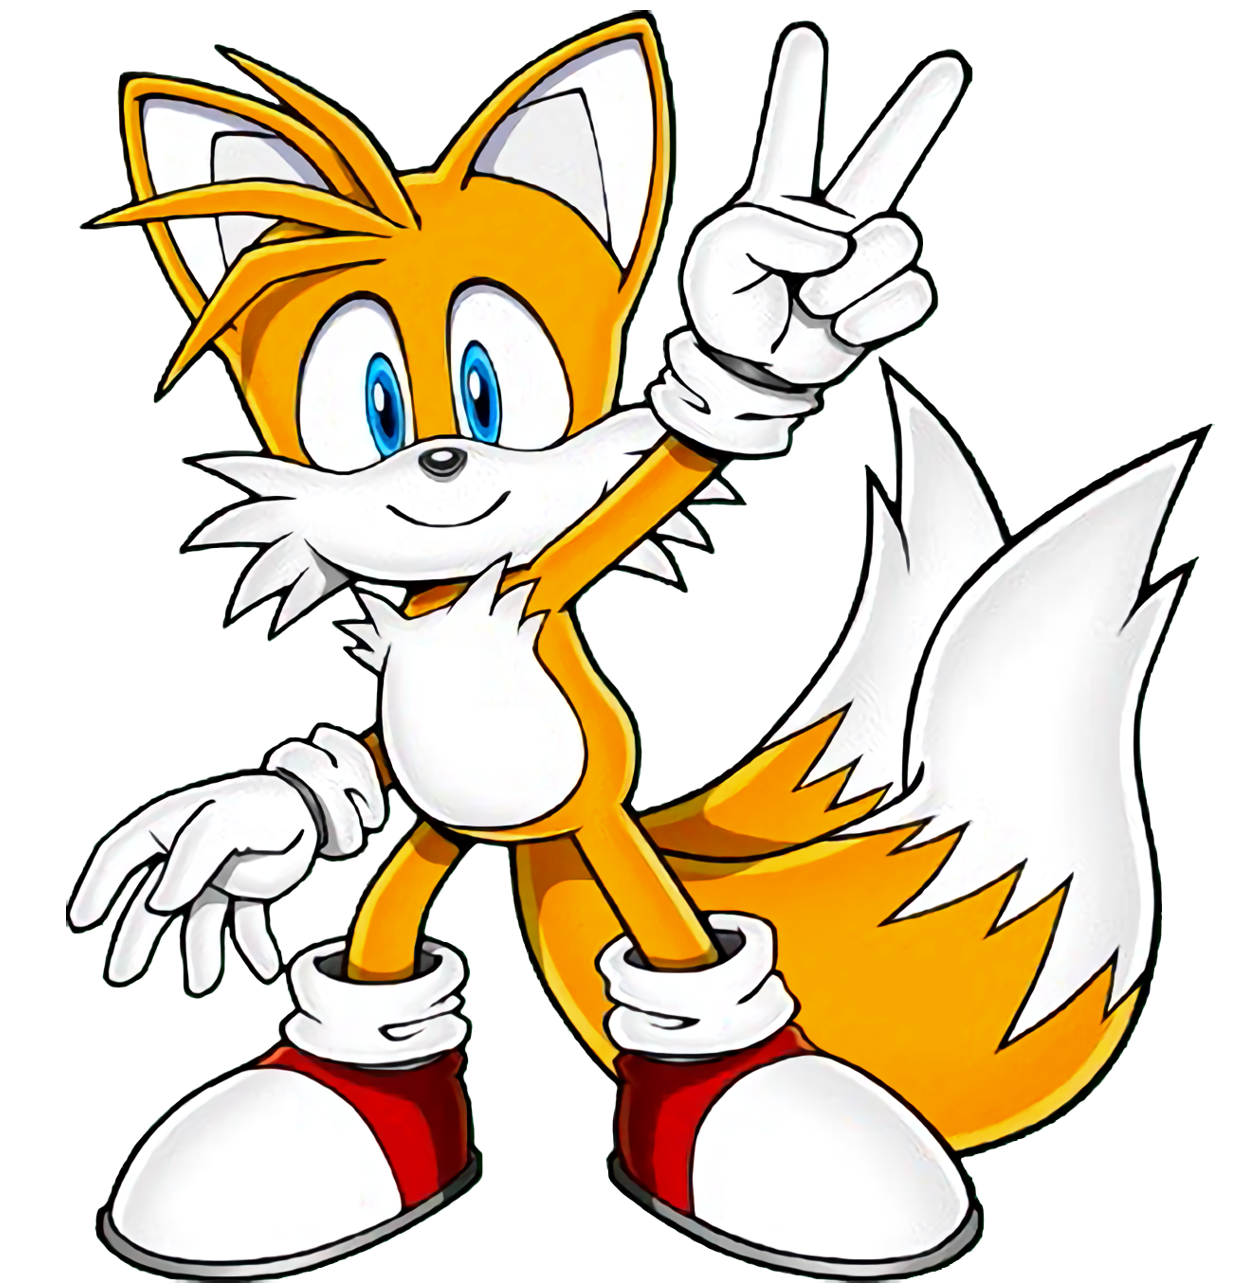 Tails 2.png